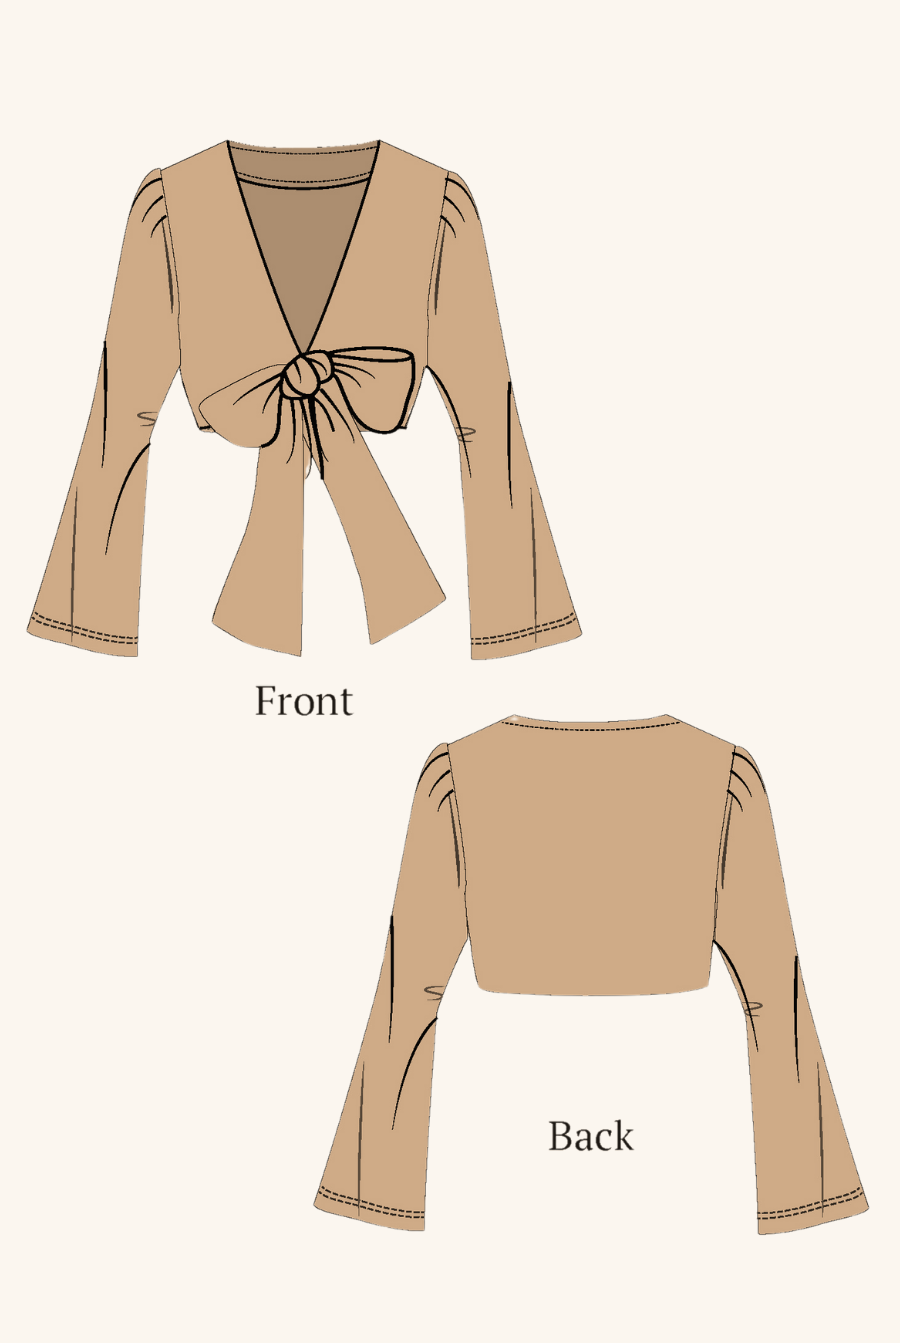 2d images of tie front crop top sewing pattern by winslet's 